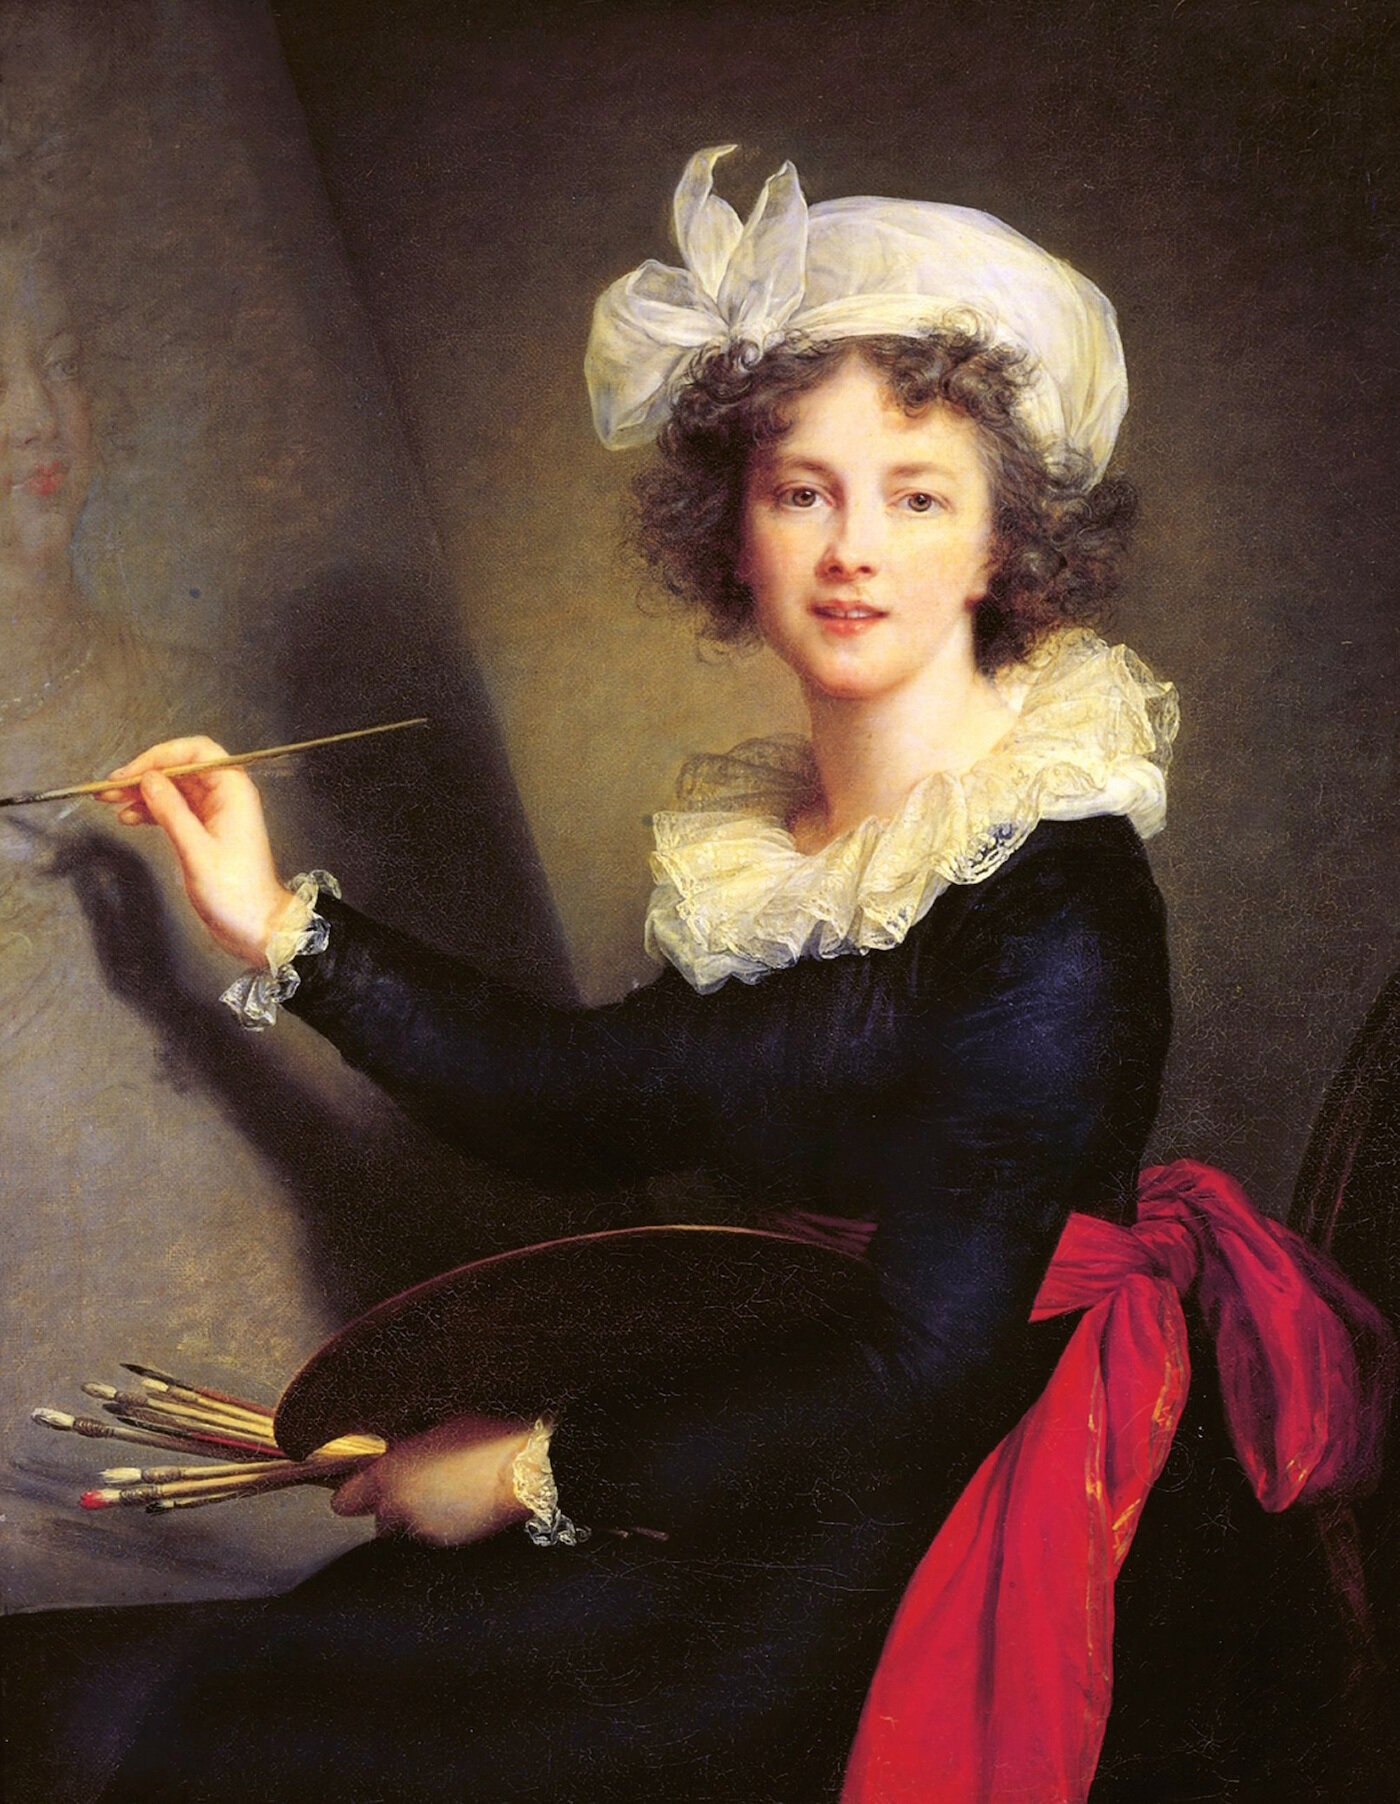  Brown-haired woman painting at an easel and wearing a white hat 